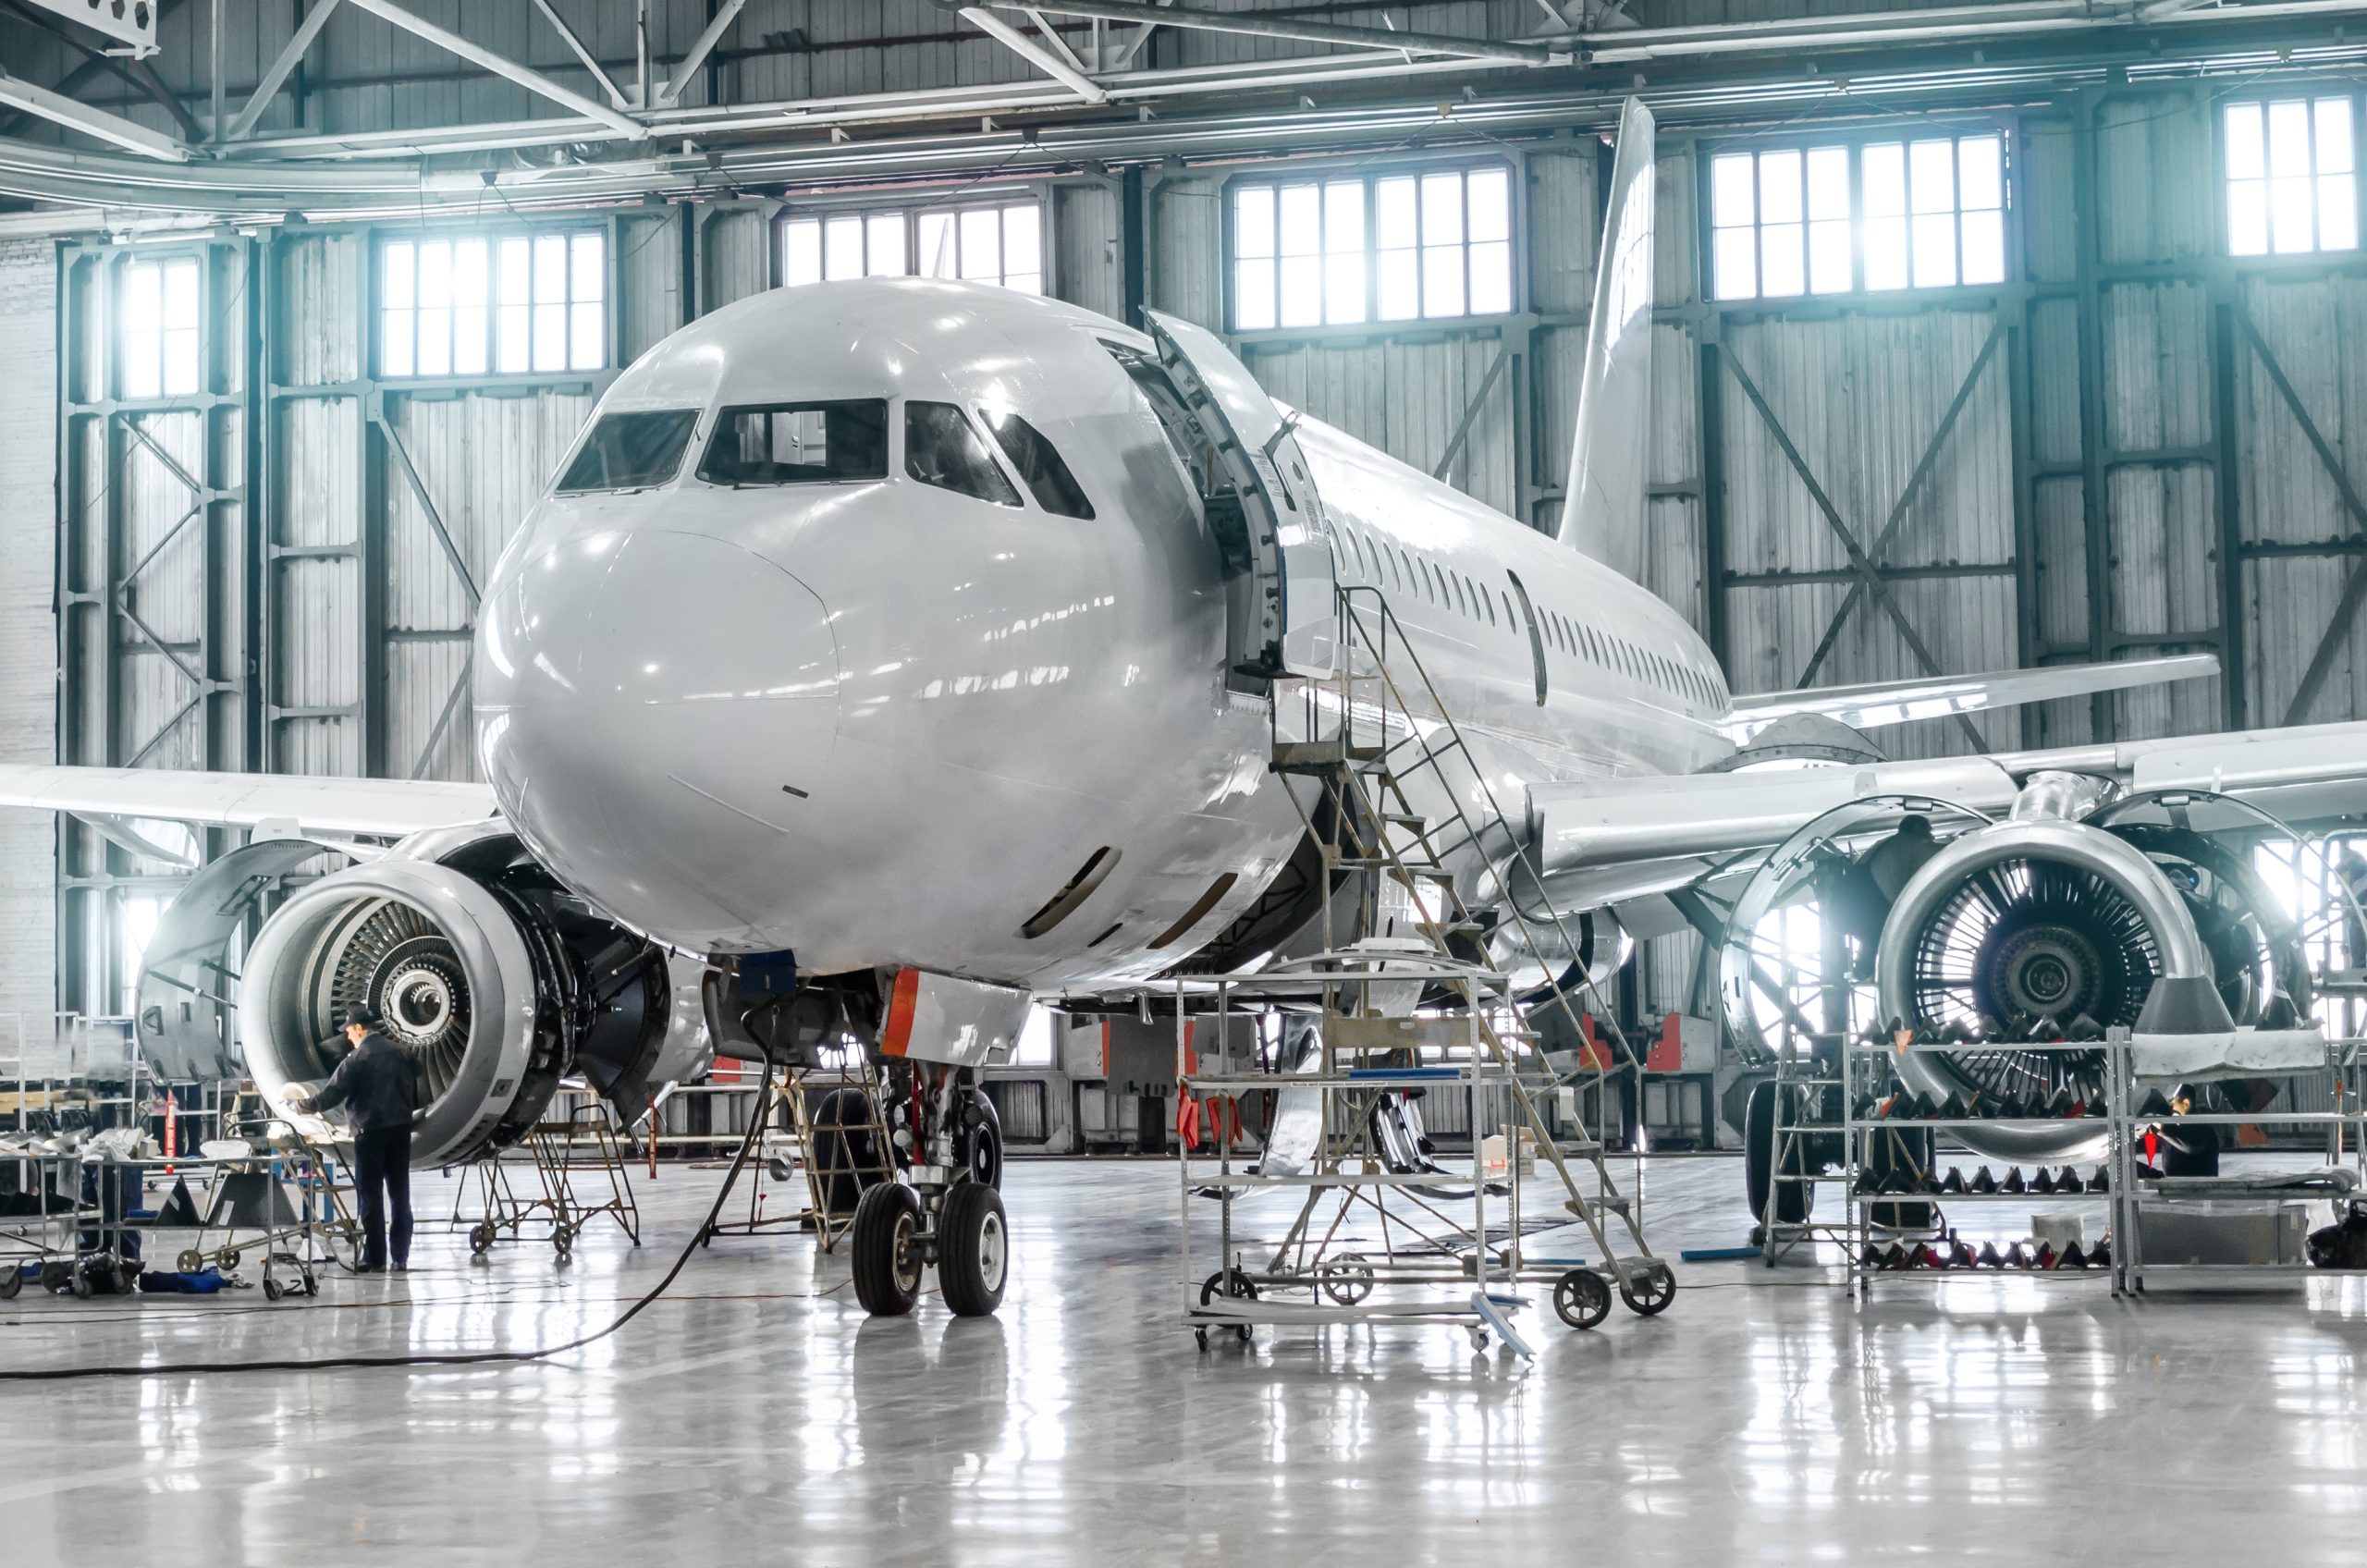 thermosetting resins for the aeronautics and composites industries